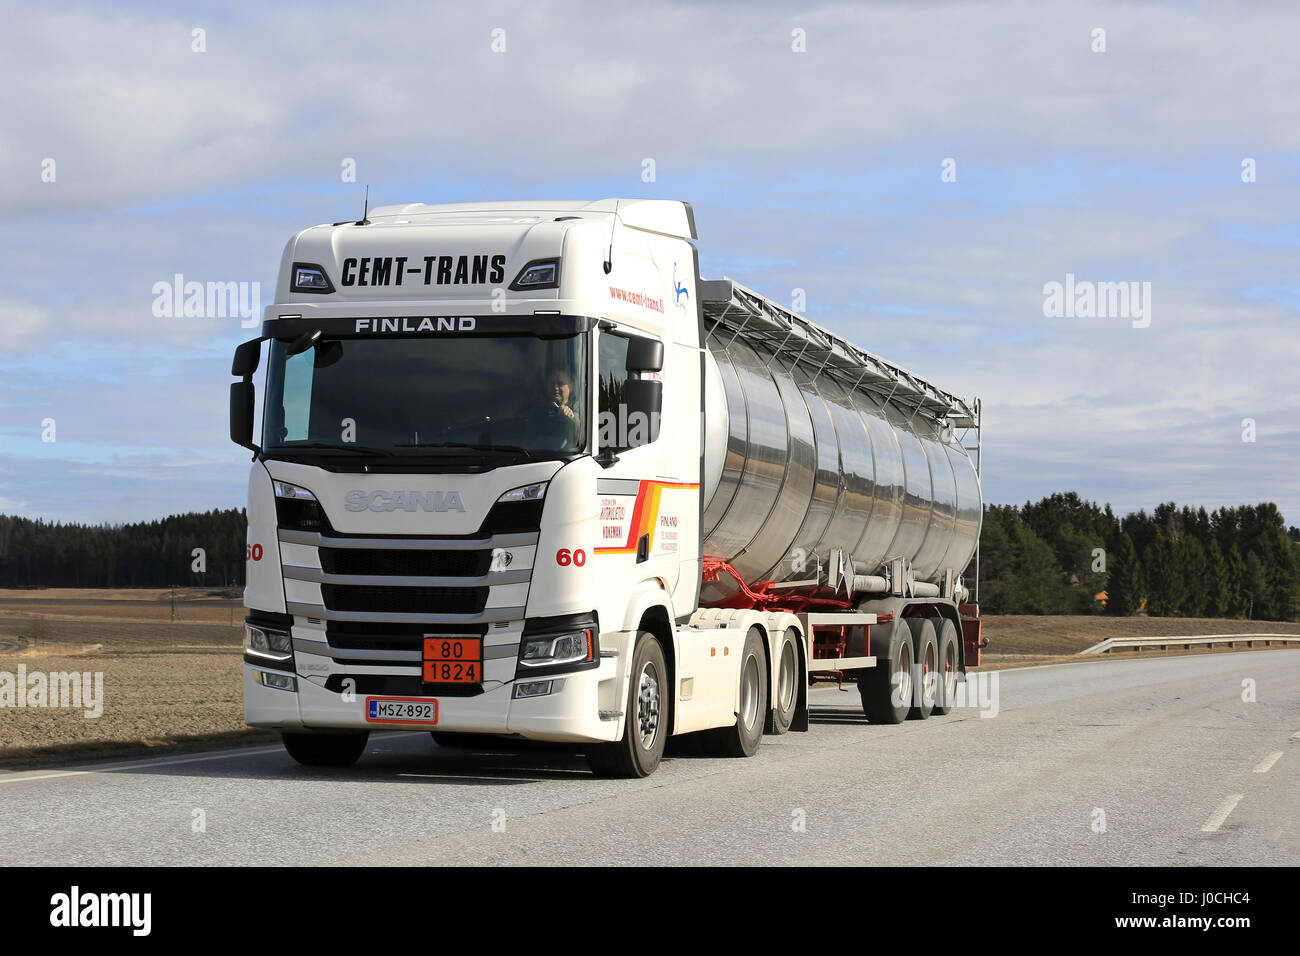 SALO, FINLAND - APRIL 8, 2017: White Next Generation Scania R500 semi tanker for ADR haul of Cemt-Trans moves along highway on a beautiful day of spri Stock Photo